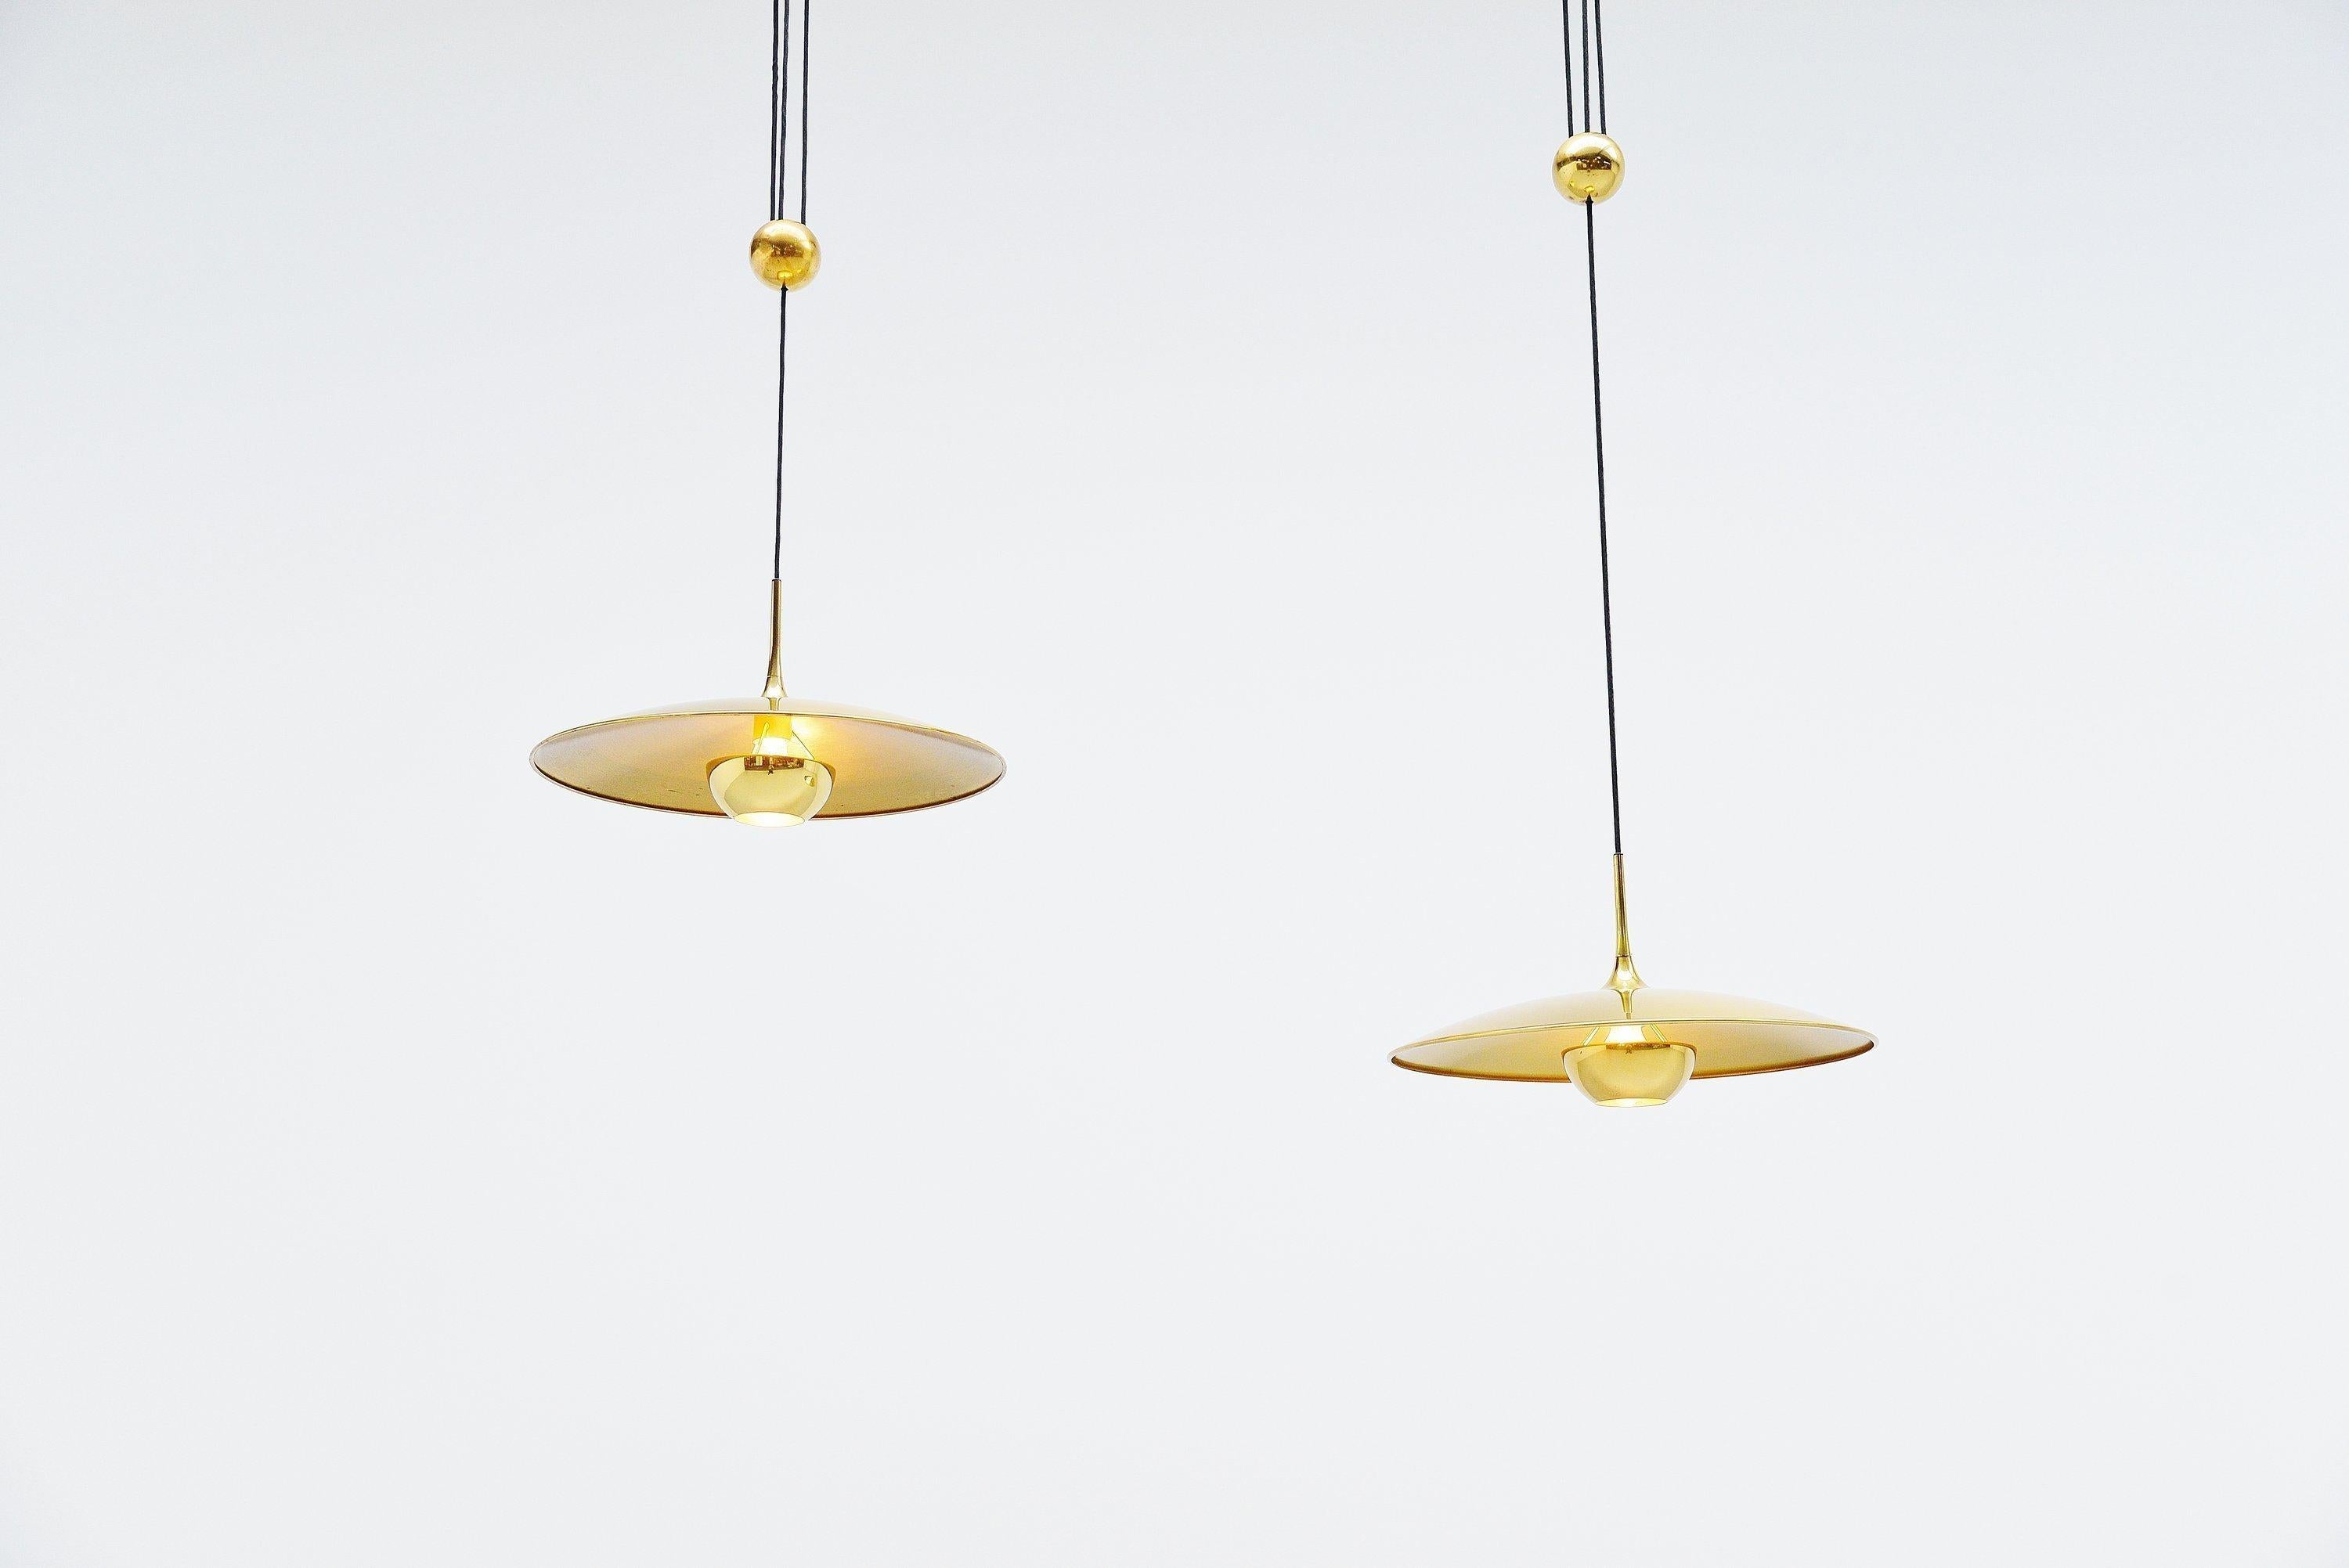 Stunning pair of Onos 55 balance lamps designed and manufactured by Florian Schulz, Germany, 1955. These super quality balance lamps have a heavy weighted round ball in the middle which makes it possible to easily change the height of these lamps.